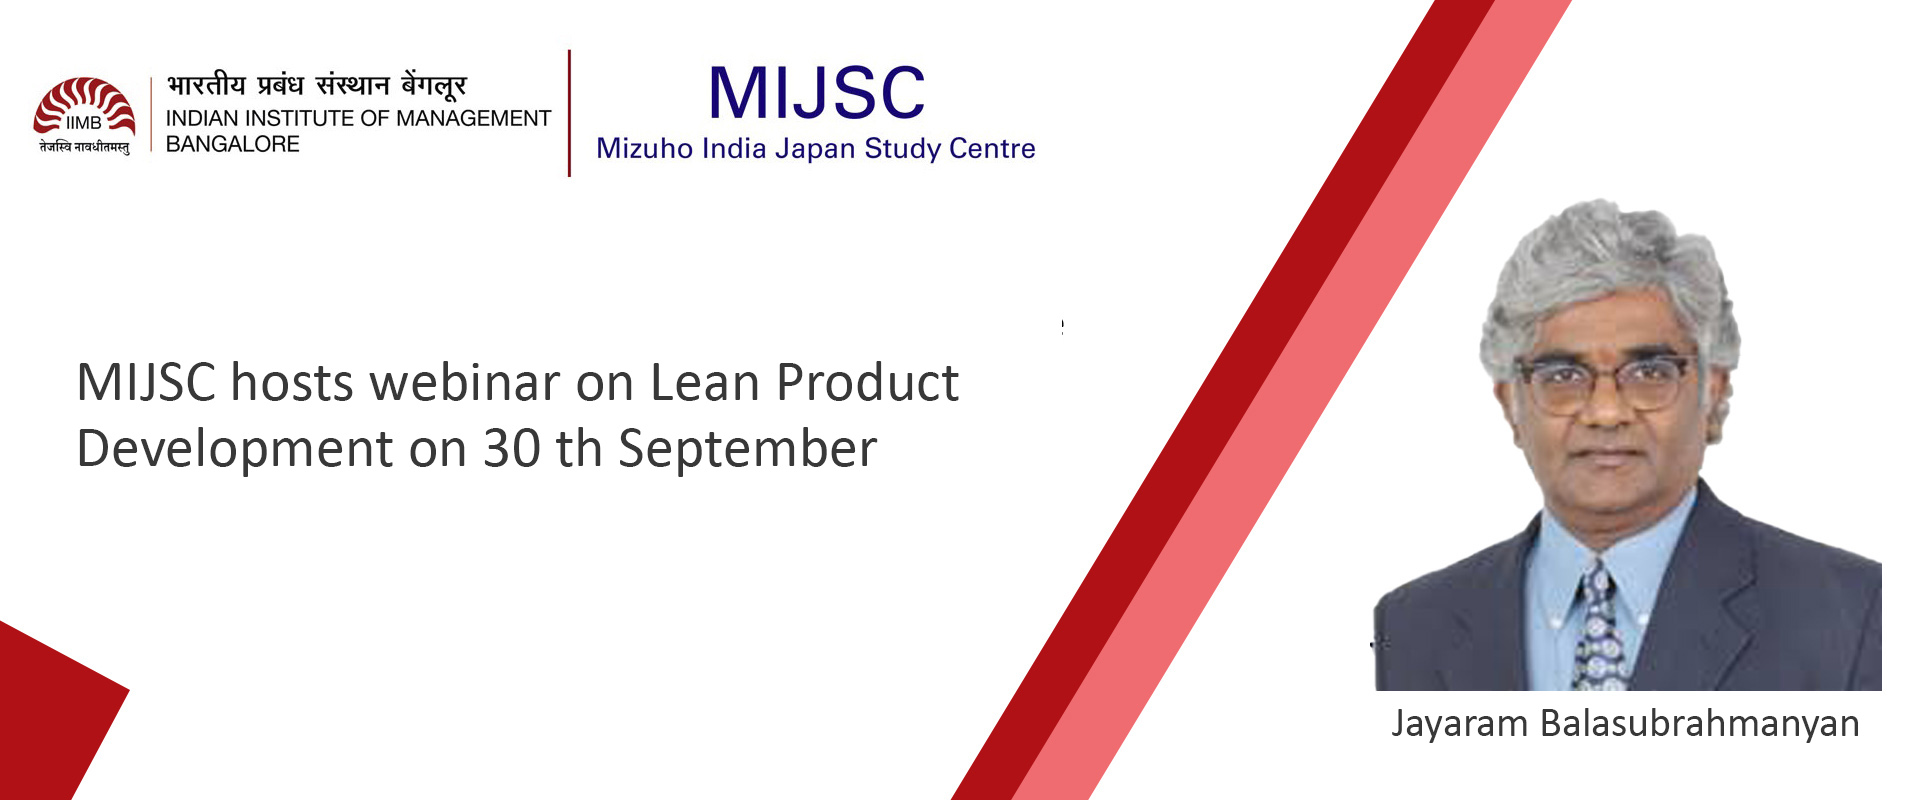 Developing Products the Lean Way: Counterintuitive Learnings for Industry’ on 29th September